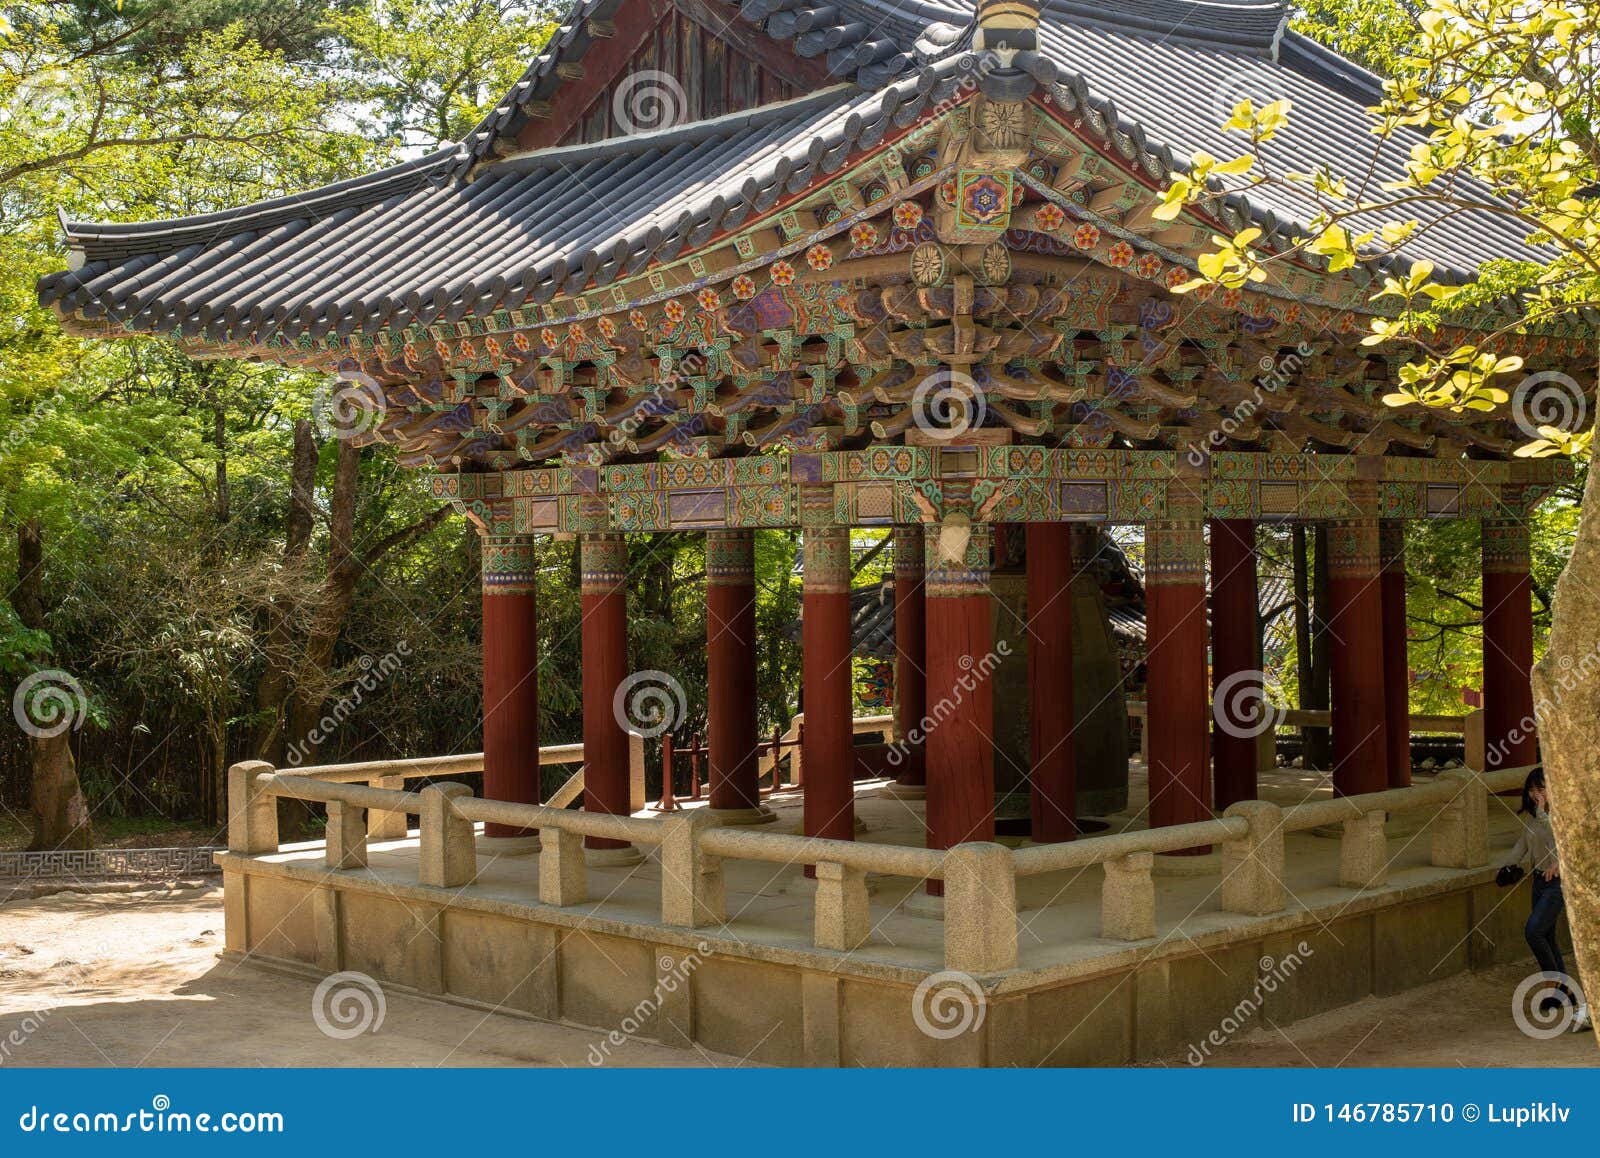 Traditional Architecture Old Building Temple in Korea Stock Image - Image of korean, tree: 50693801